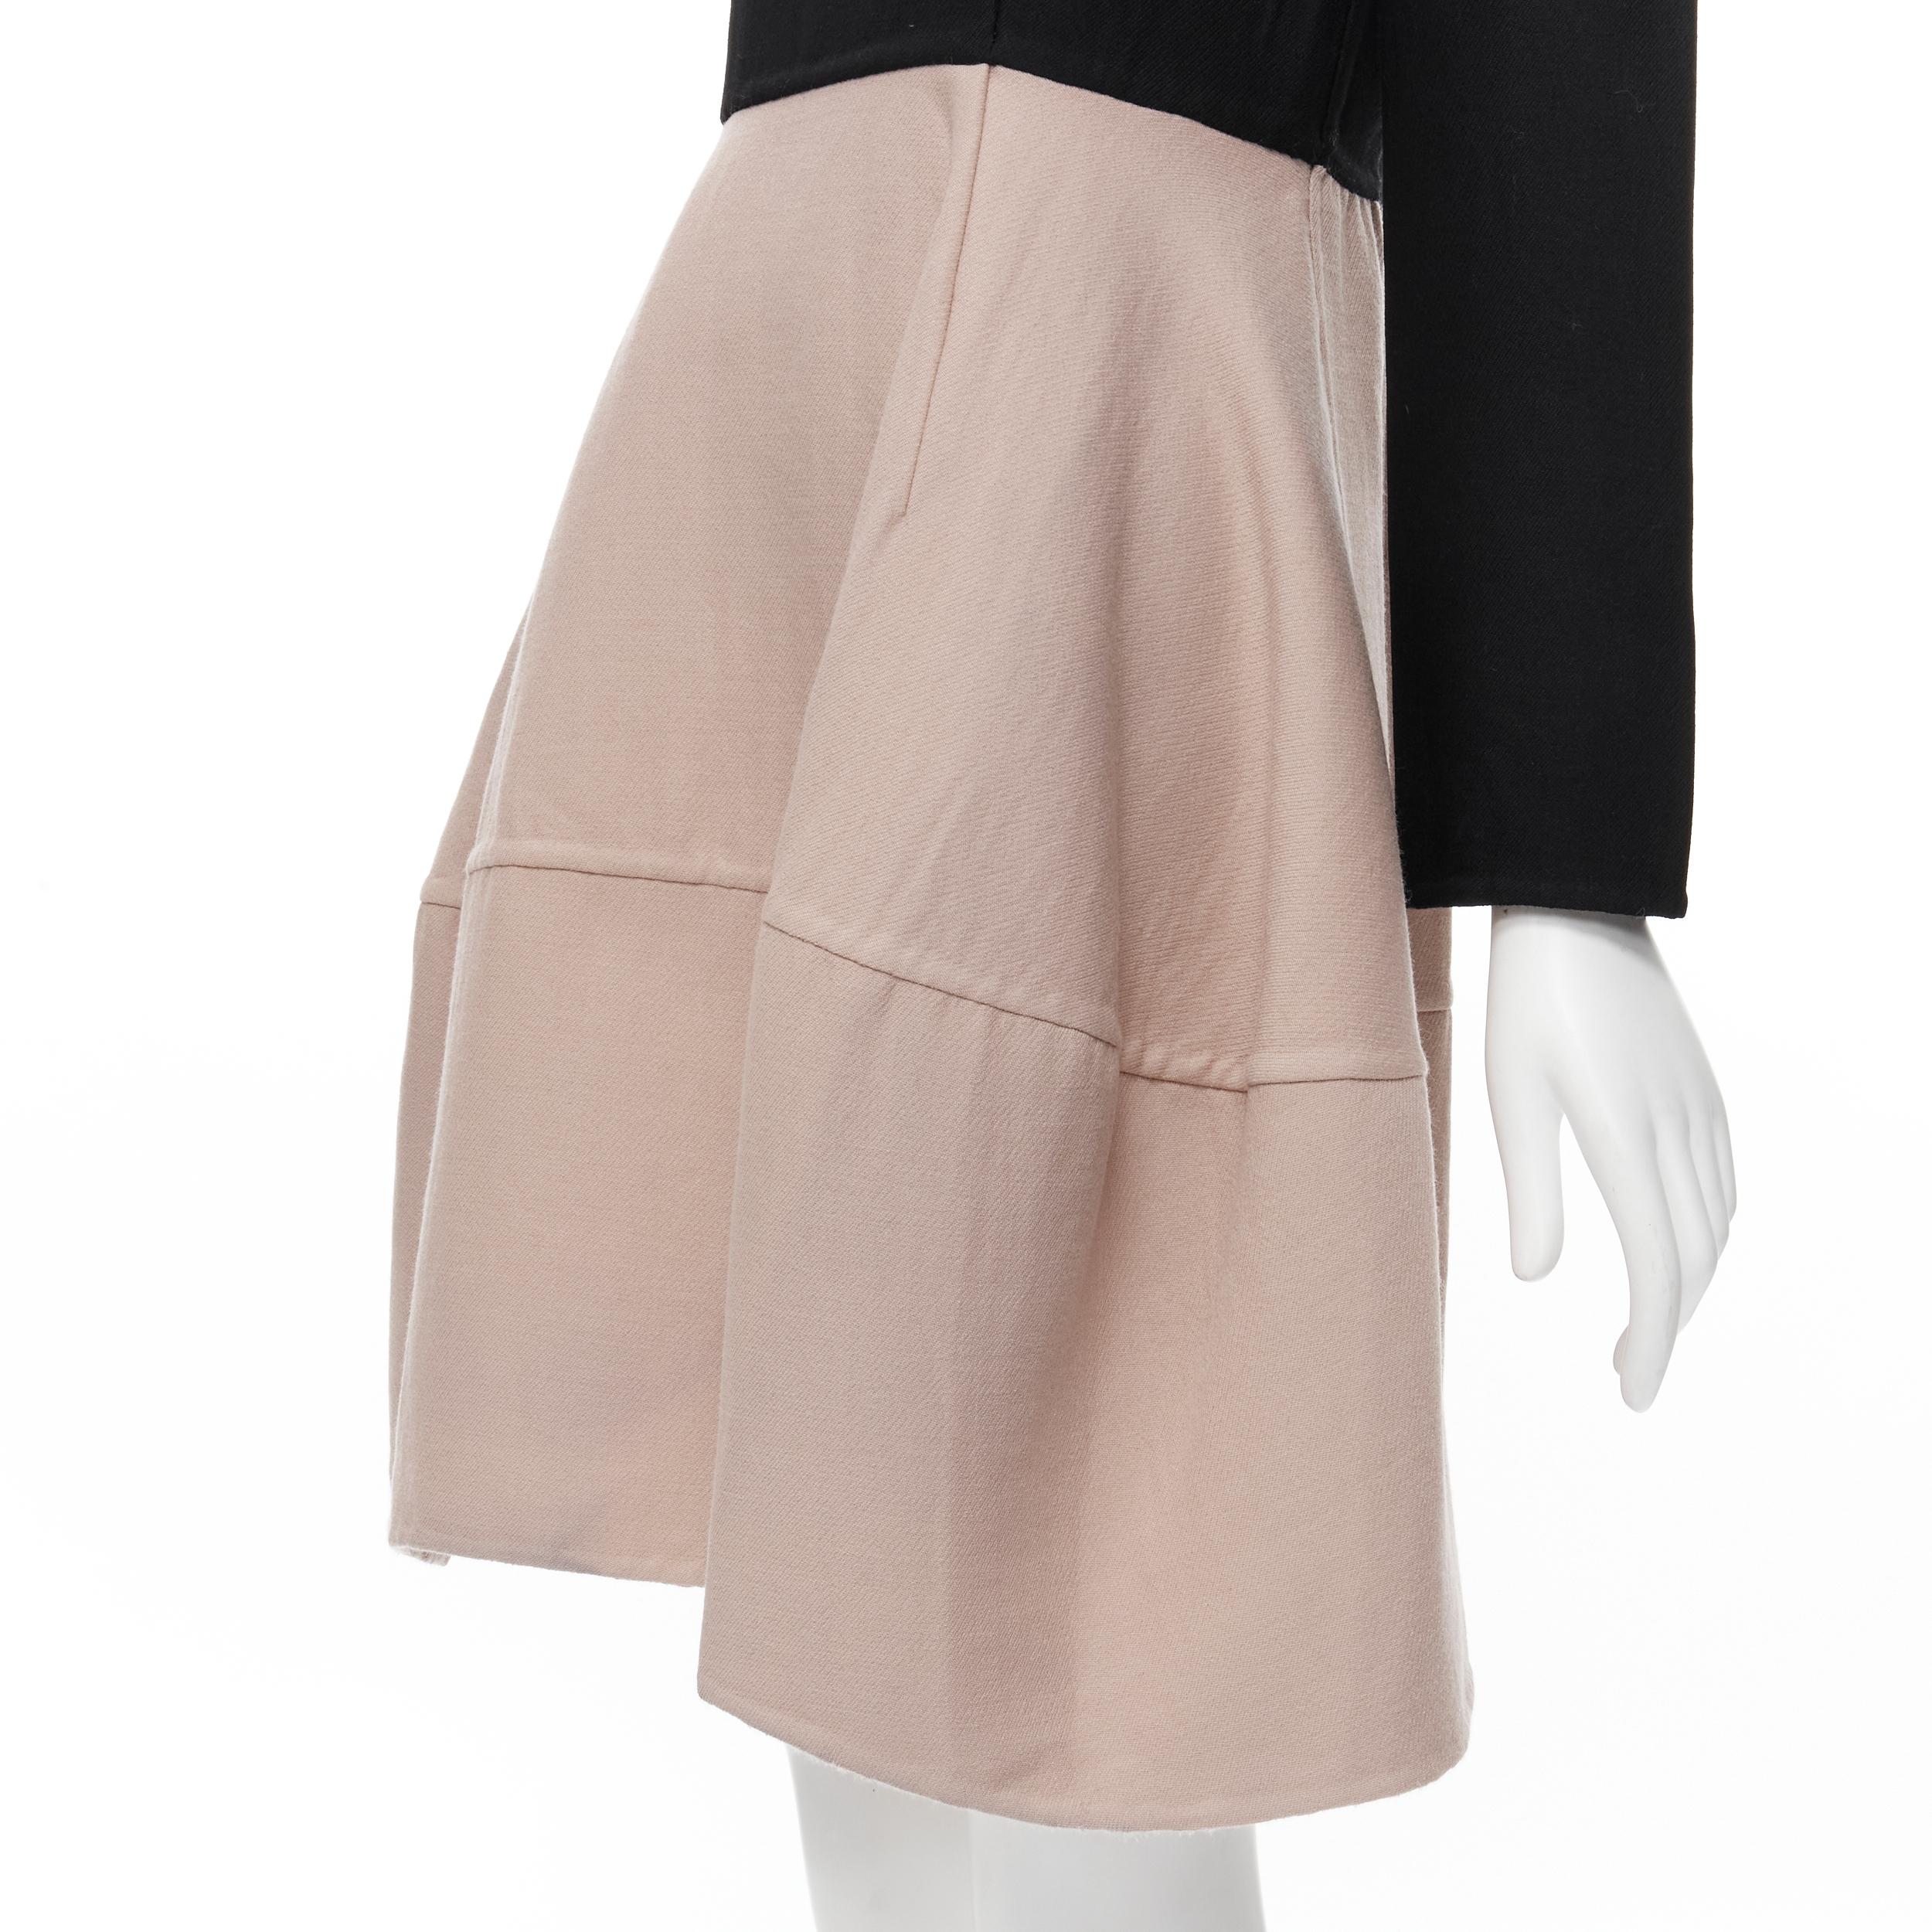 MARNI black nude wool crepe long sleeve bubble skirt fit flared dress IT38 XS 
Reference: CELG/A00081 
Brand: Marni 
Material: Wool 
Color: Black 
Pattern: Solid 
Closure: Zip 
Made in: Italy 

CONDITION: 
Condition: Excellent, this item was